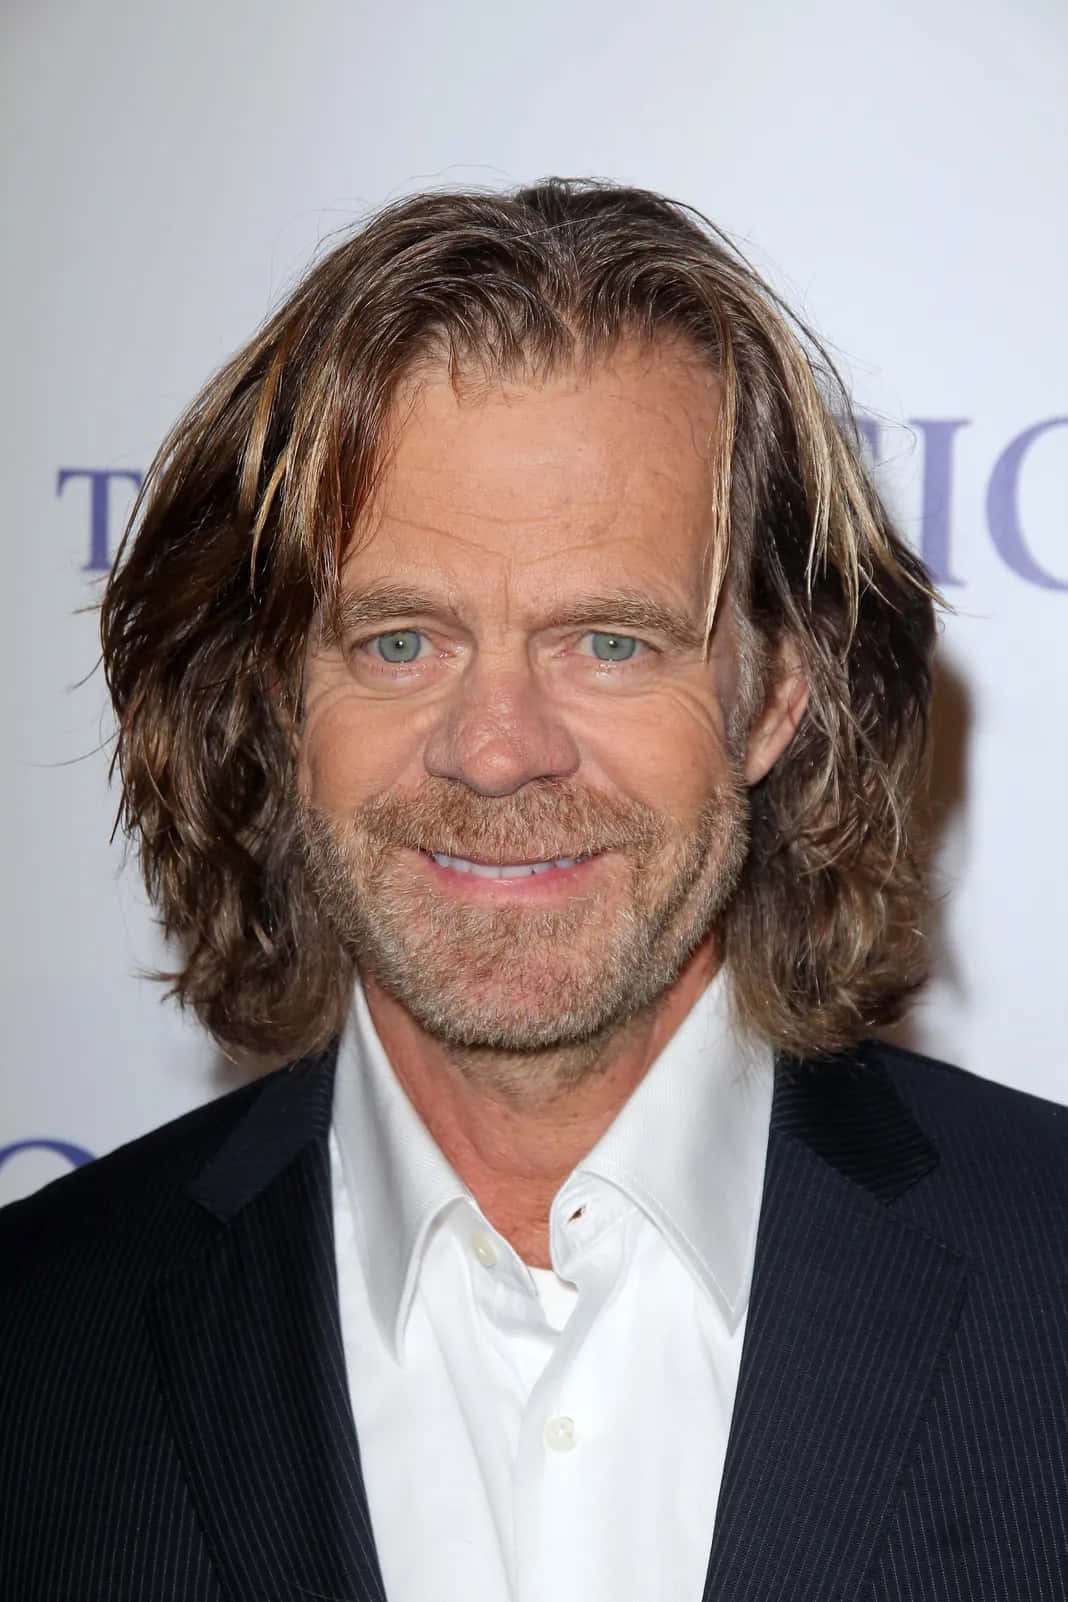 William H. Macy - Talented Actor in a Pensive Pose Wallpaper